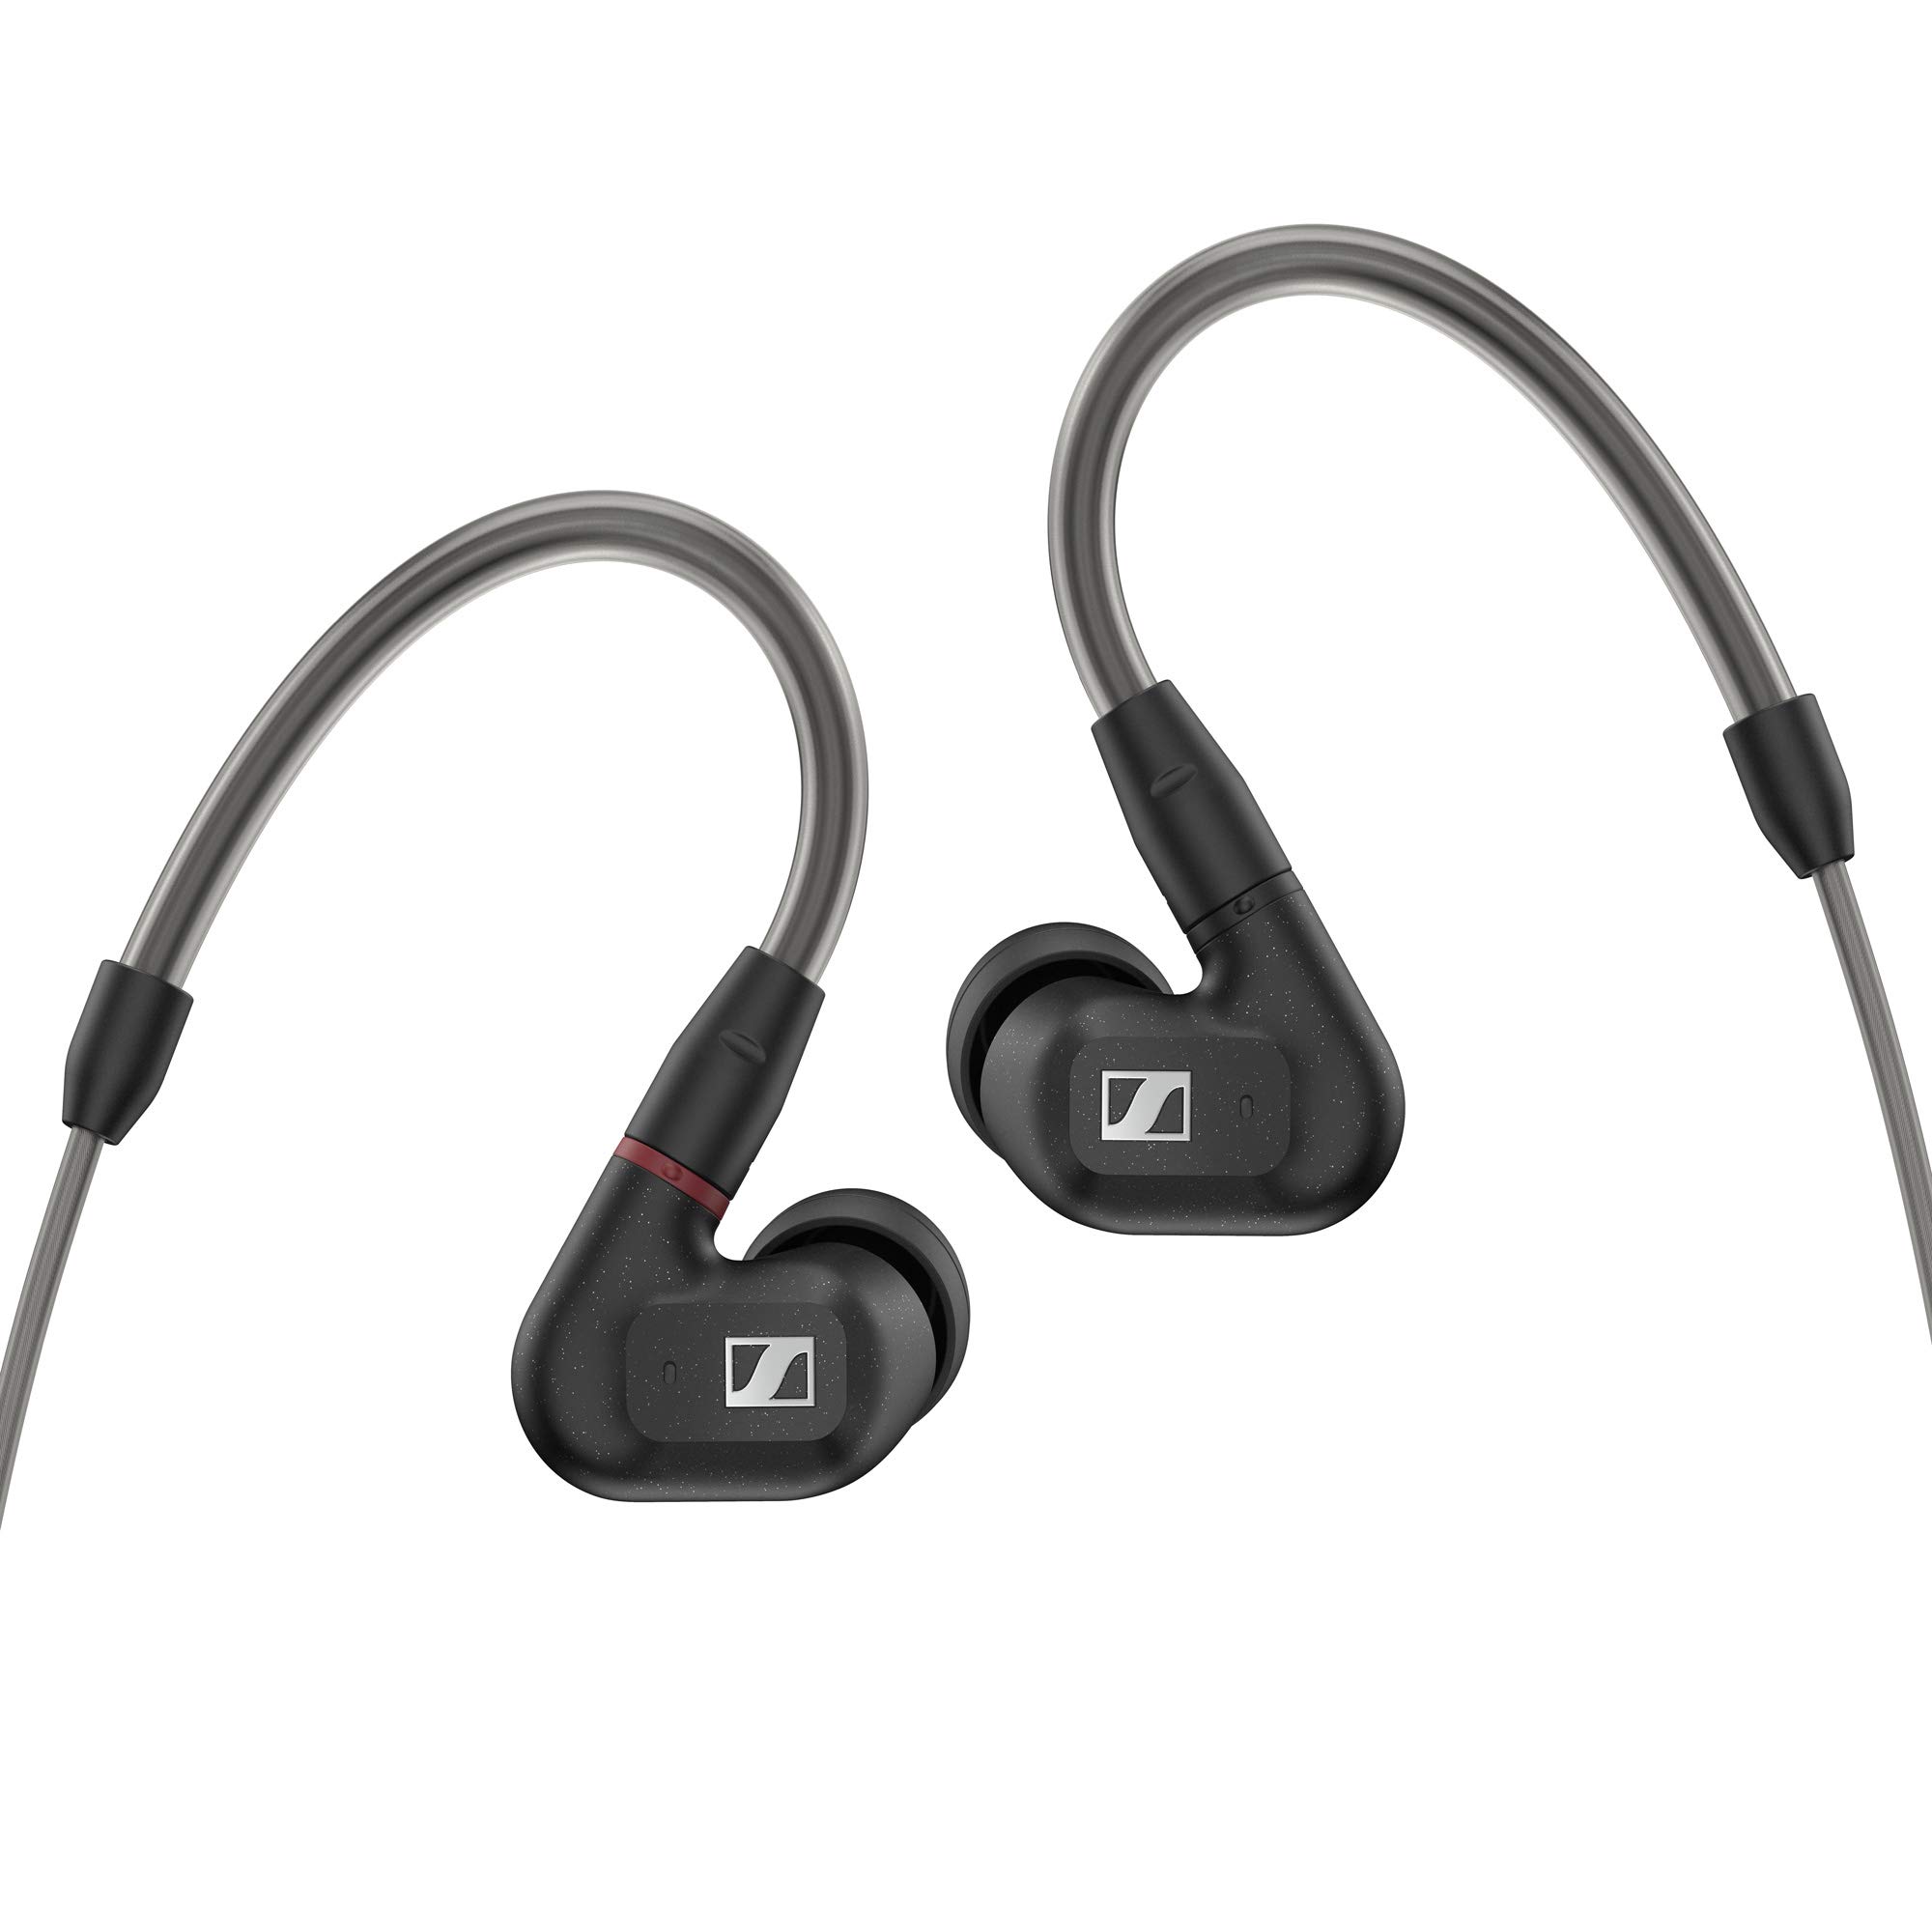 Sennheiser IE 300 in-Ear Audiophile Headphones - Sound Isolating with XWB Transducers for Balanced Sound, Detachable Cable with Flexible Ear Hooks, 2-Year Warranty (Black)